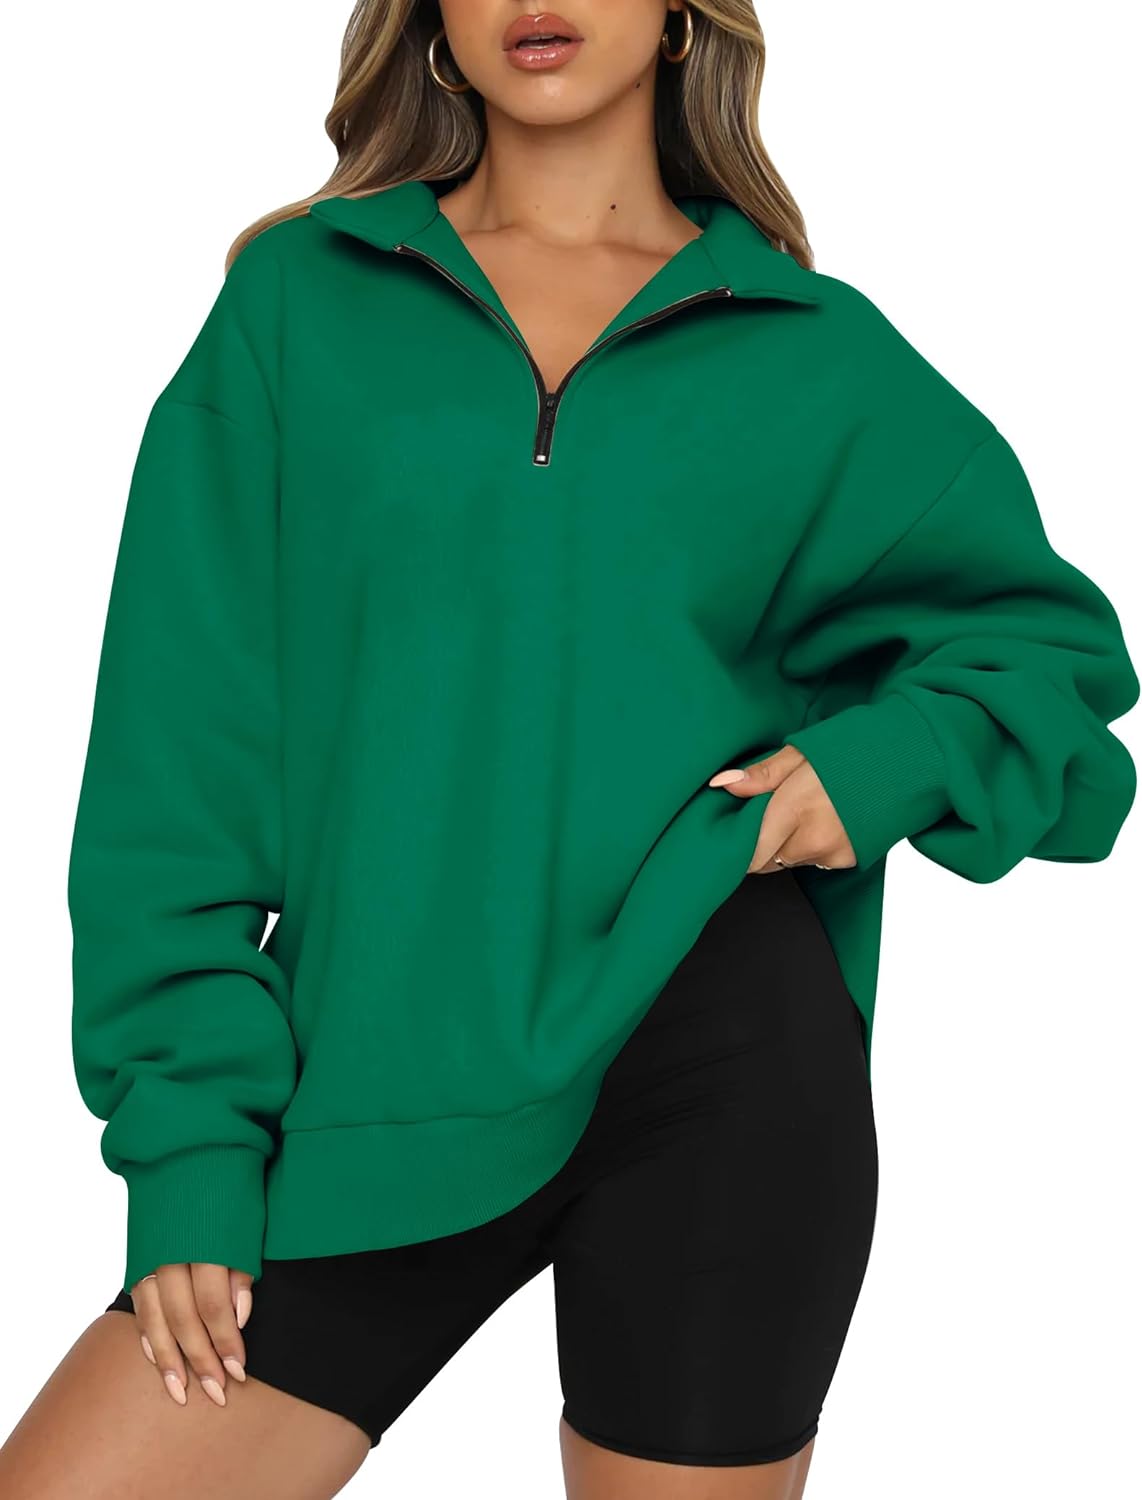 Save Big on Trendy Queen Womens Oversized Sweatshirts Hoodies - Limited Time Offer!